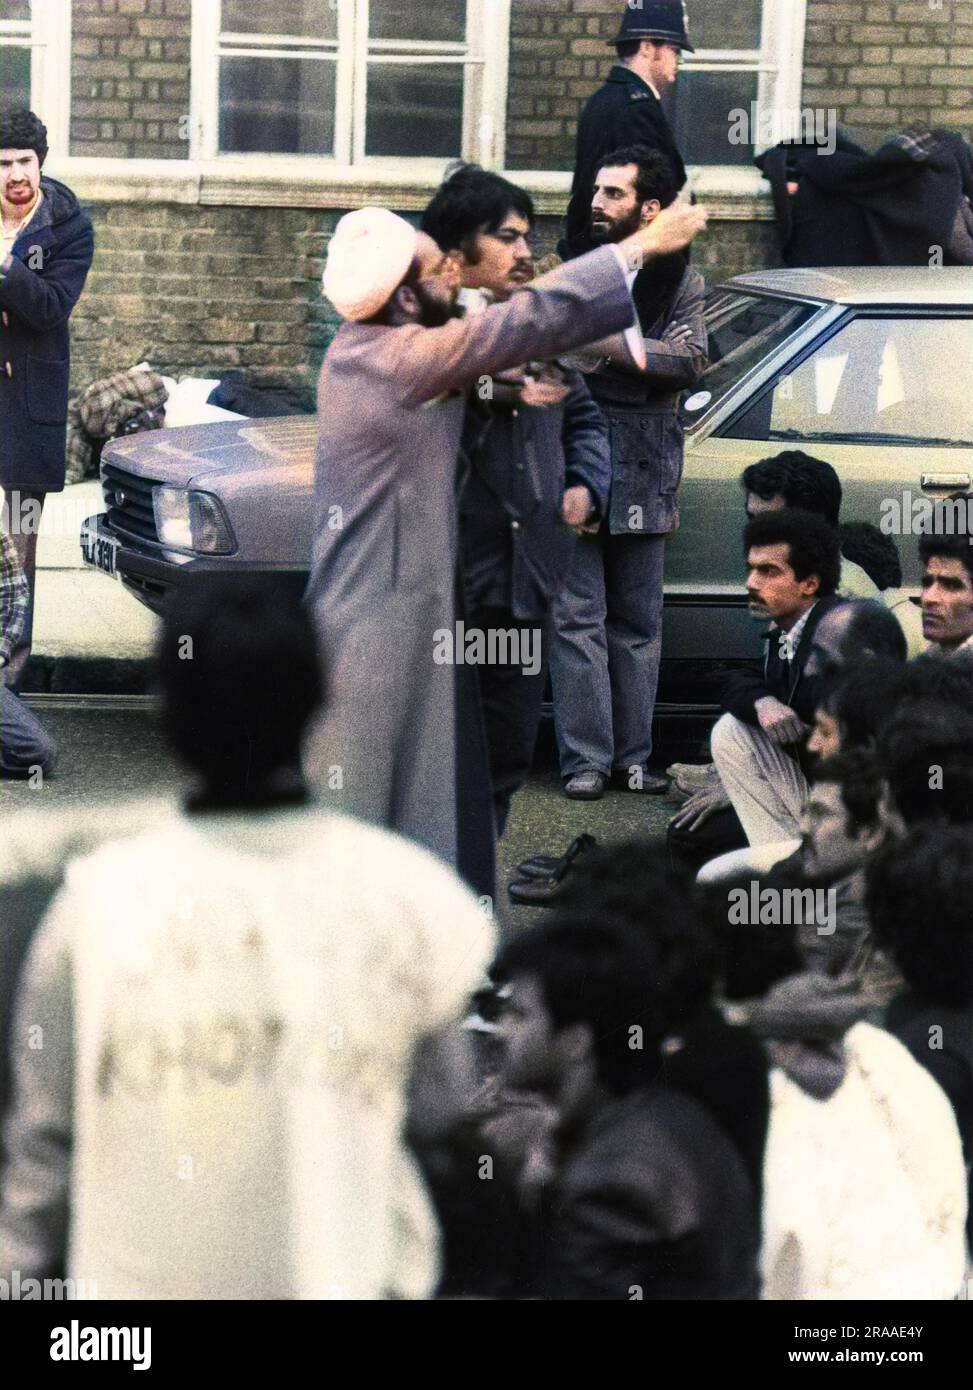 An Iranian Imam taking prayers outside during the siege of the Iranian Embassy, London.     Date: 30 April - 5 May 1980 Stock Photo